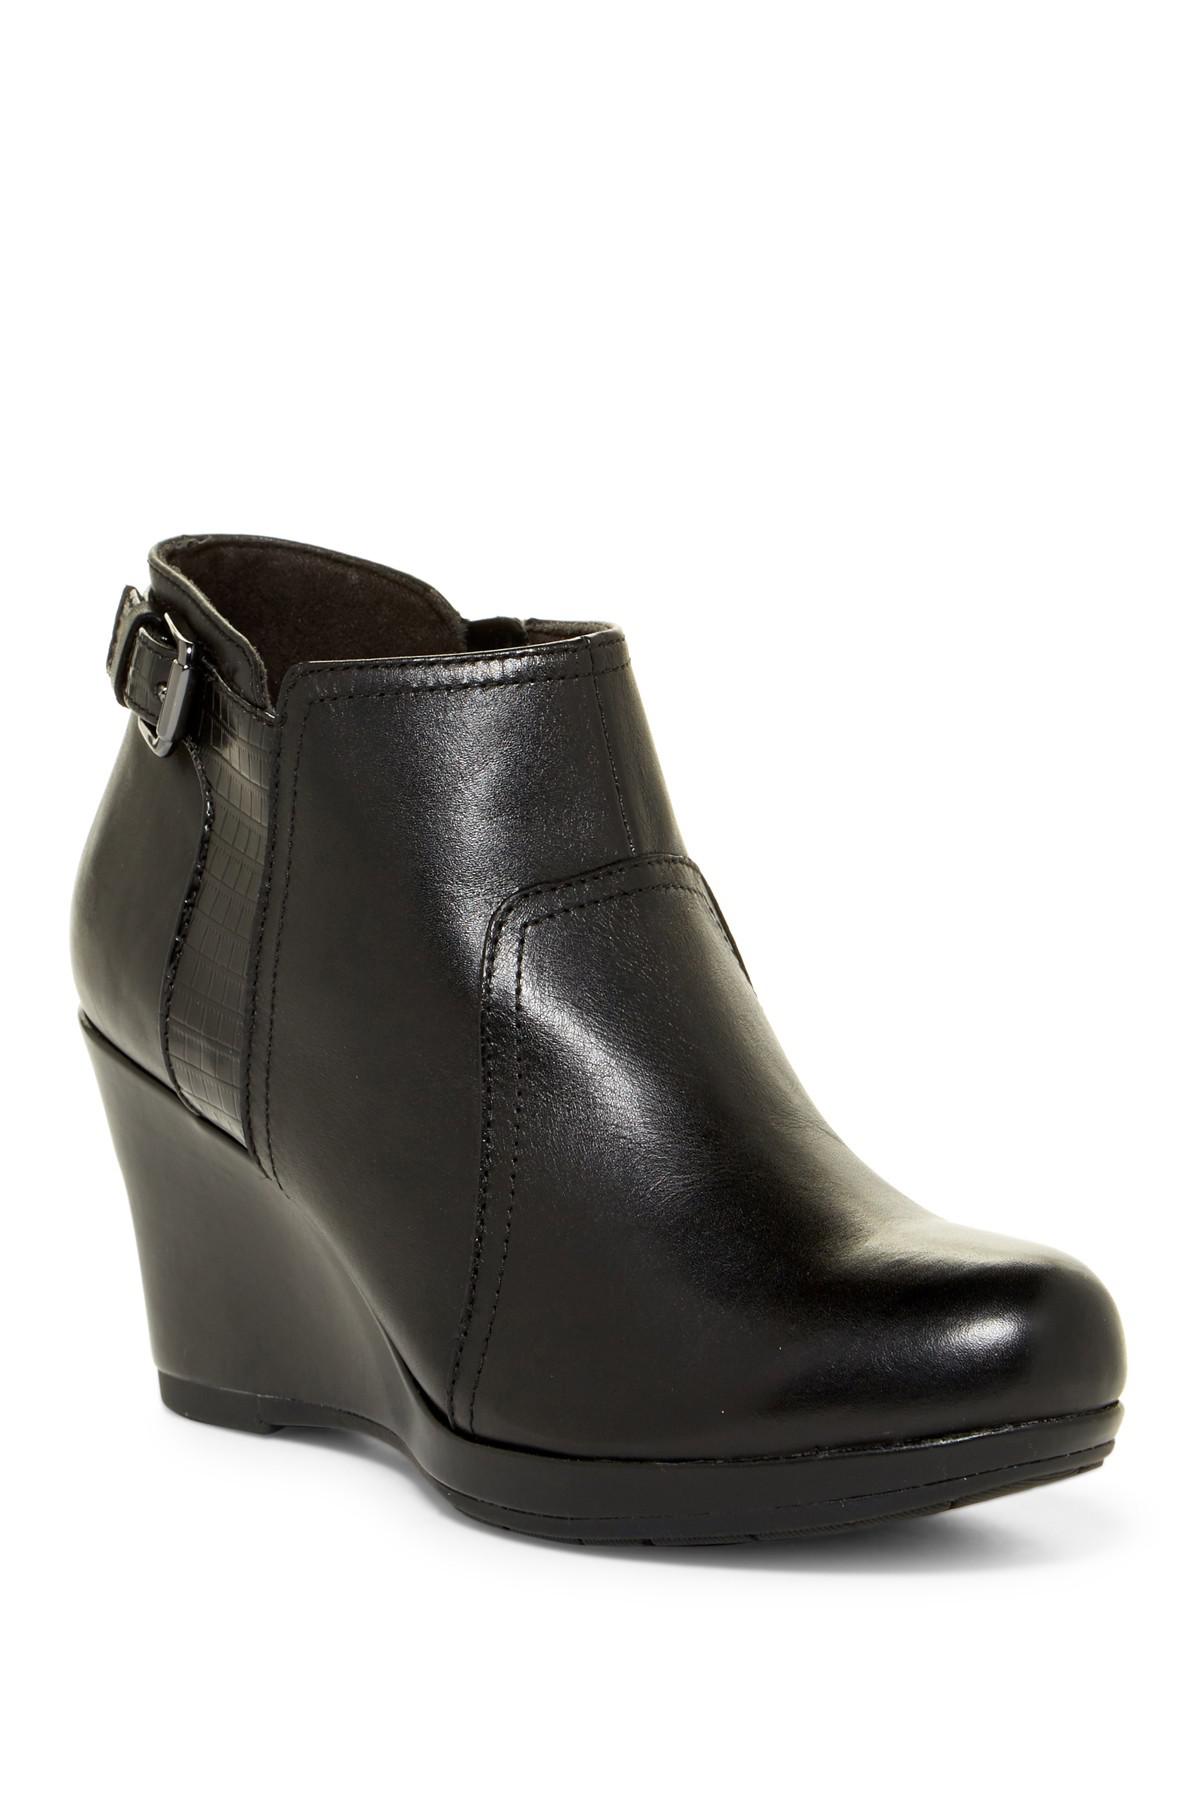 Lyst - Clarks Collection Women's Camryn Fiona Wedge Booties in Black